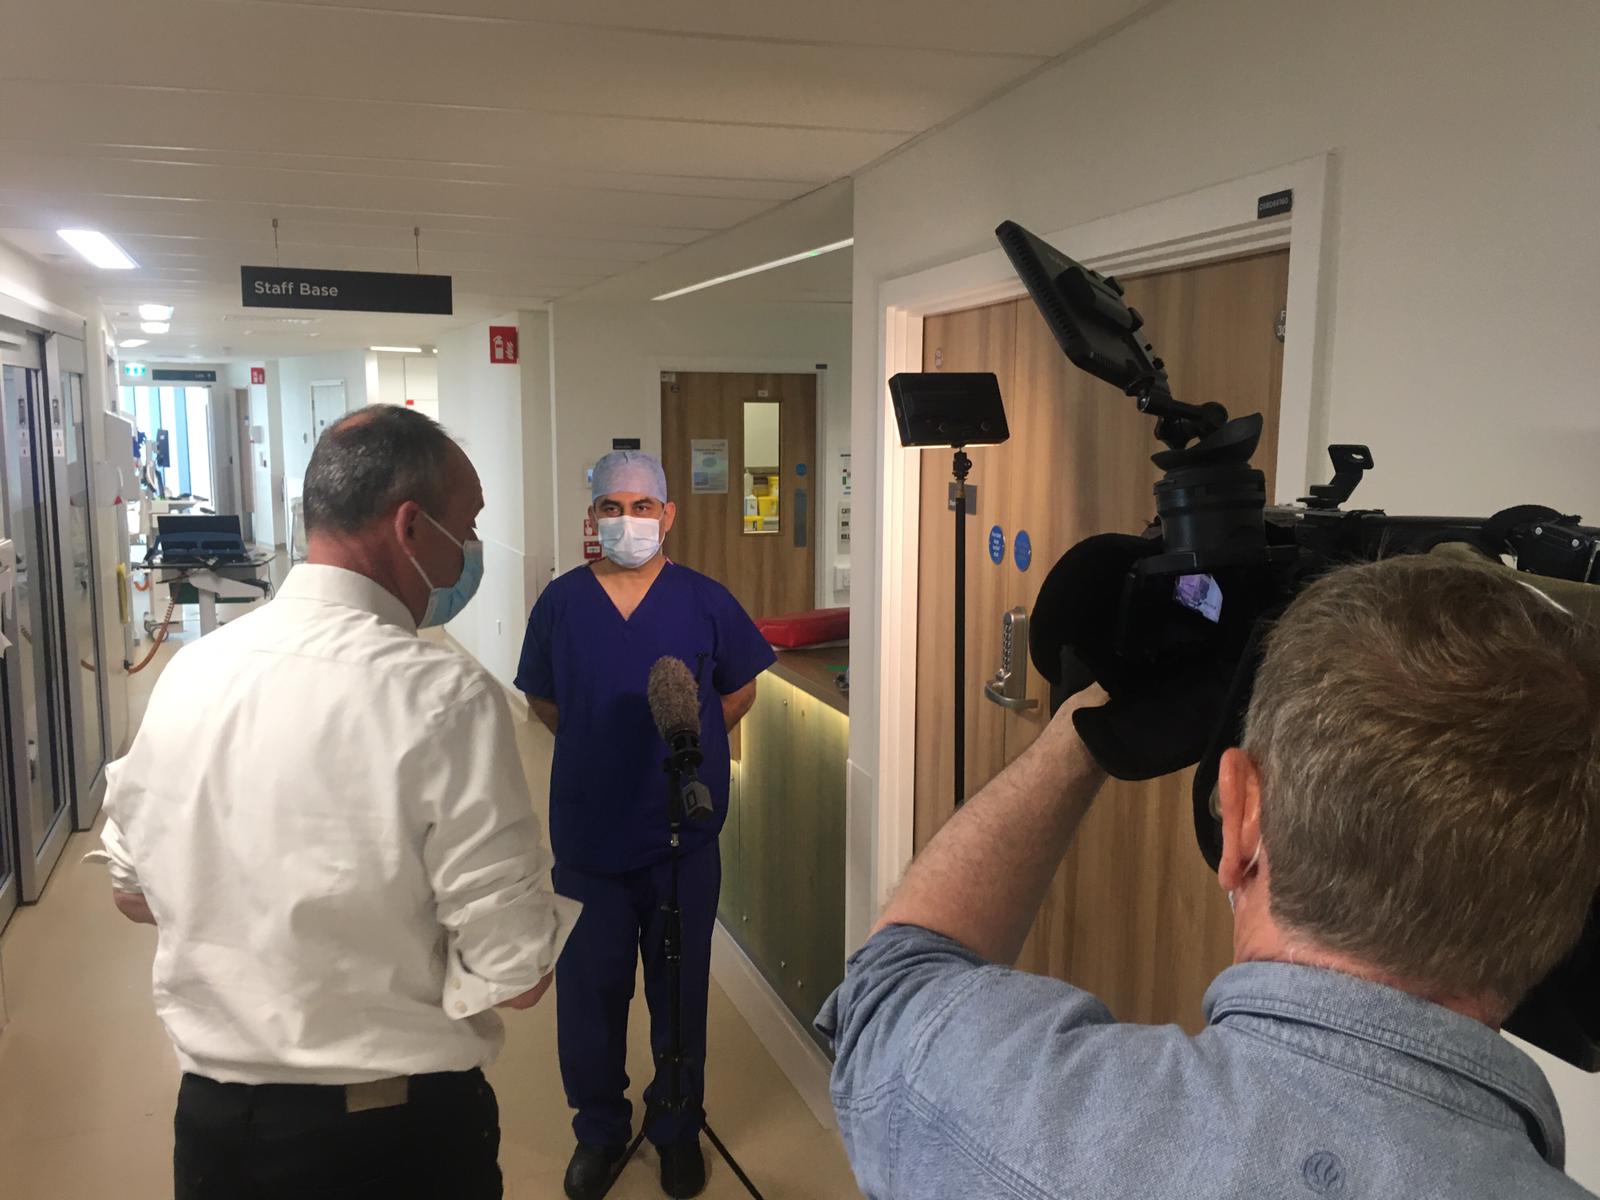 A surgeon being interviewed by a TV reporter, with a person holding a camera. 